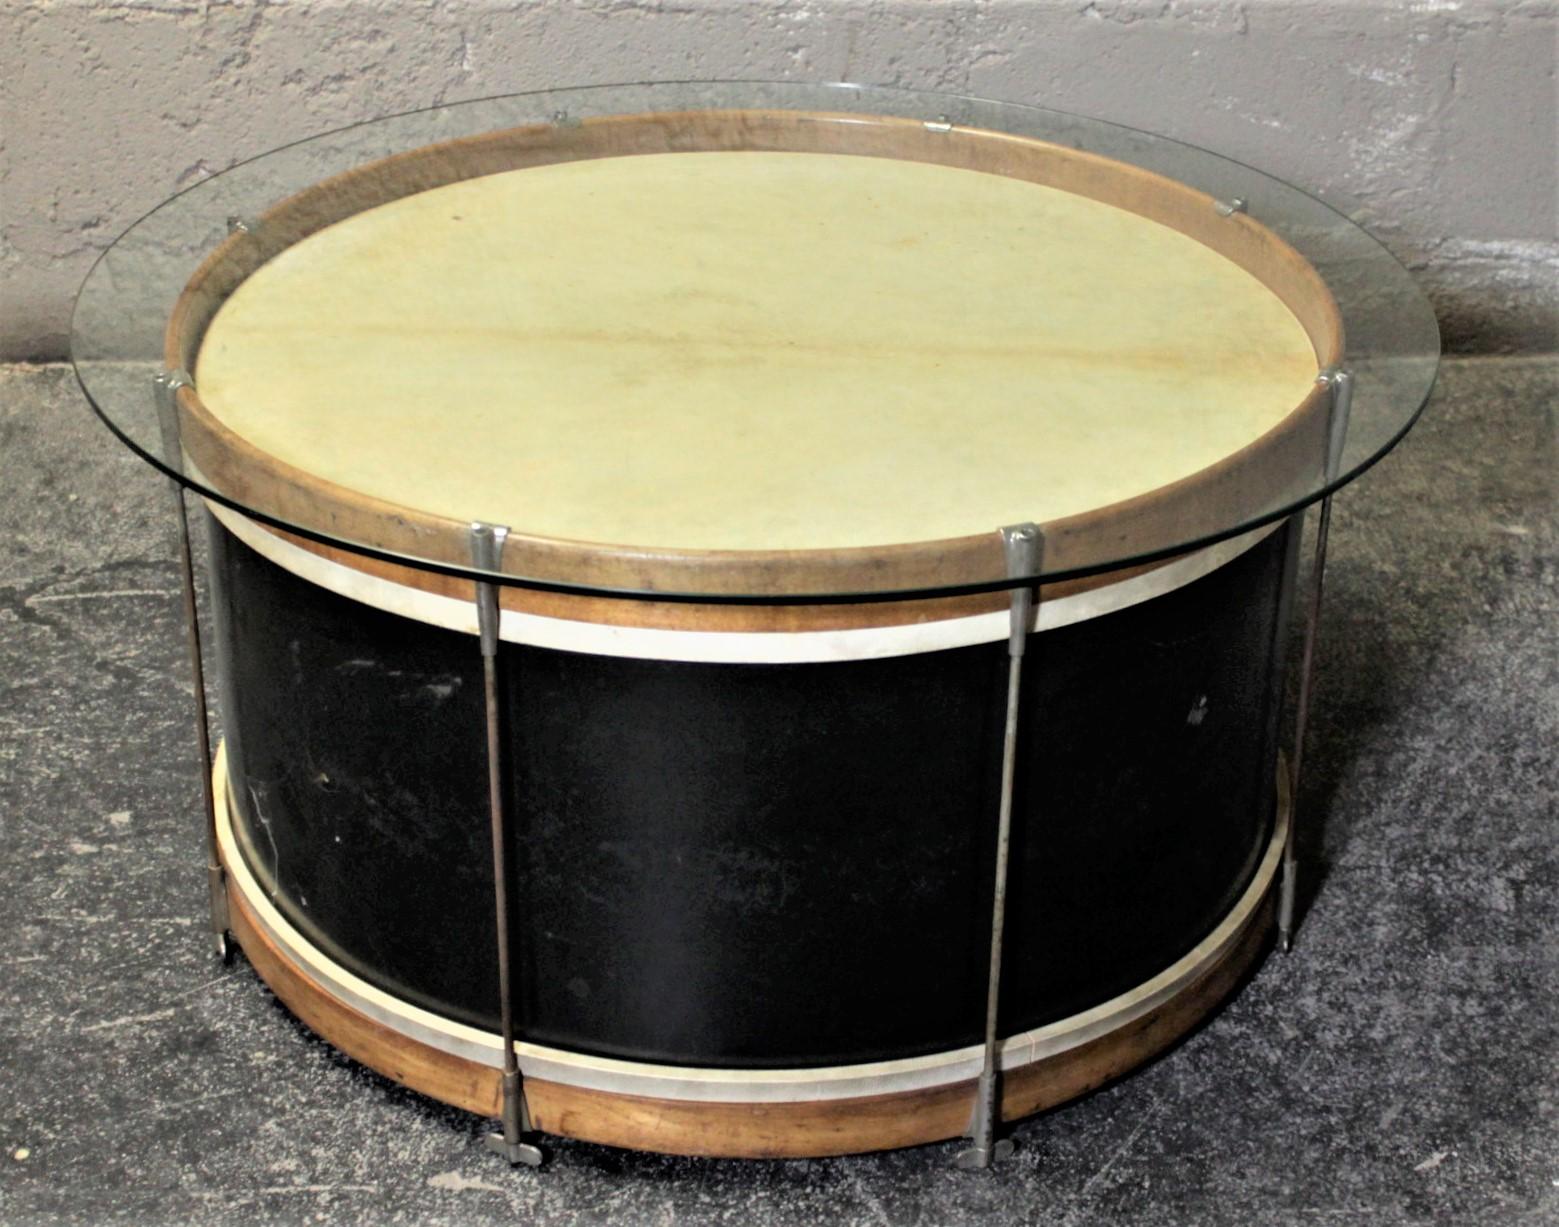 This novel Folk Art glass topped drum coffee or cocktail table has no maker's tag on it, but it is presumed to have been made in the United States in circa 1940s. This vintage bass drum has natural wood rims a painted wood body and chrome lugs. The